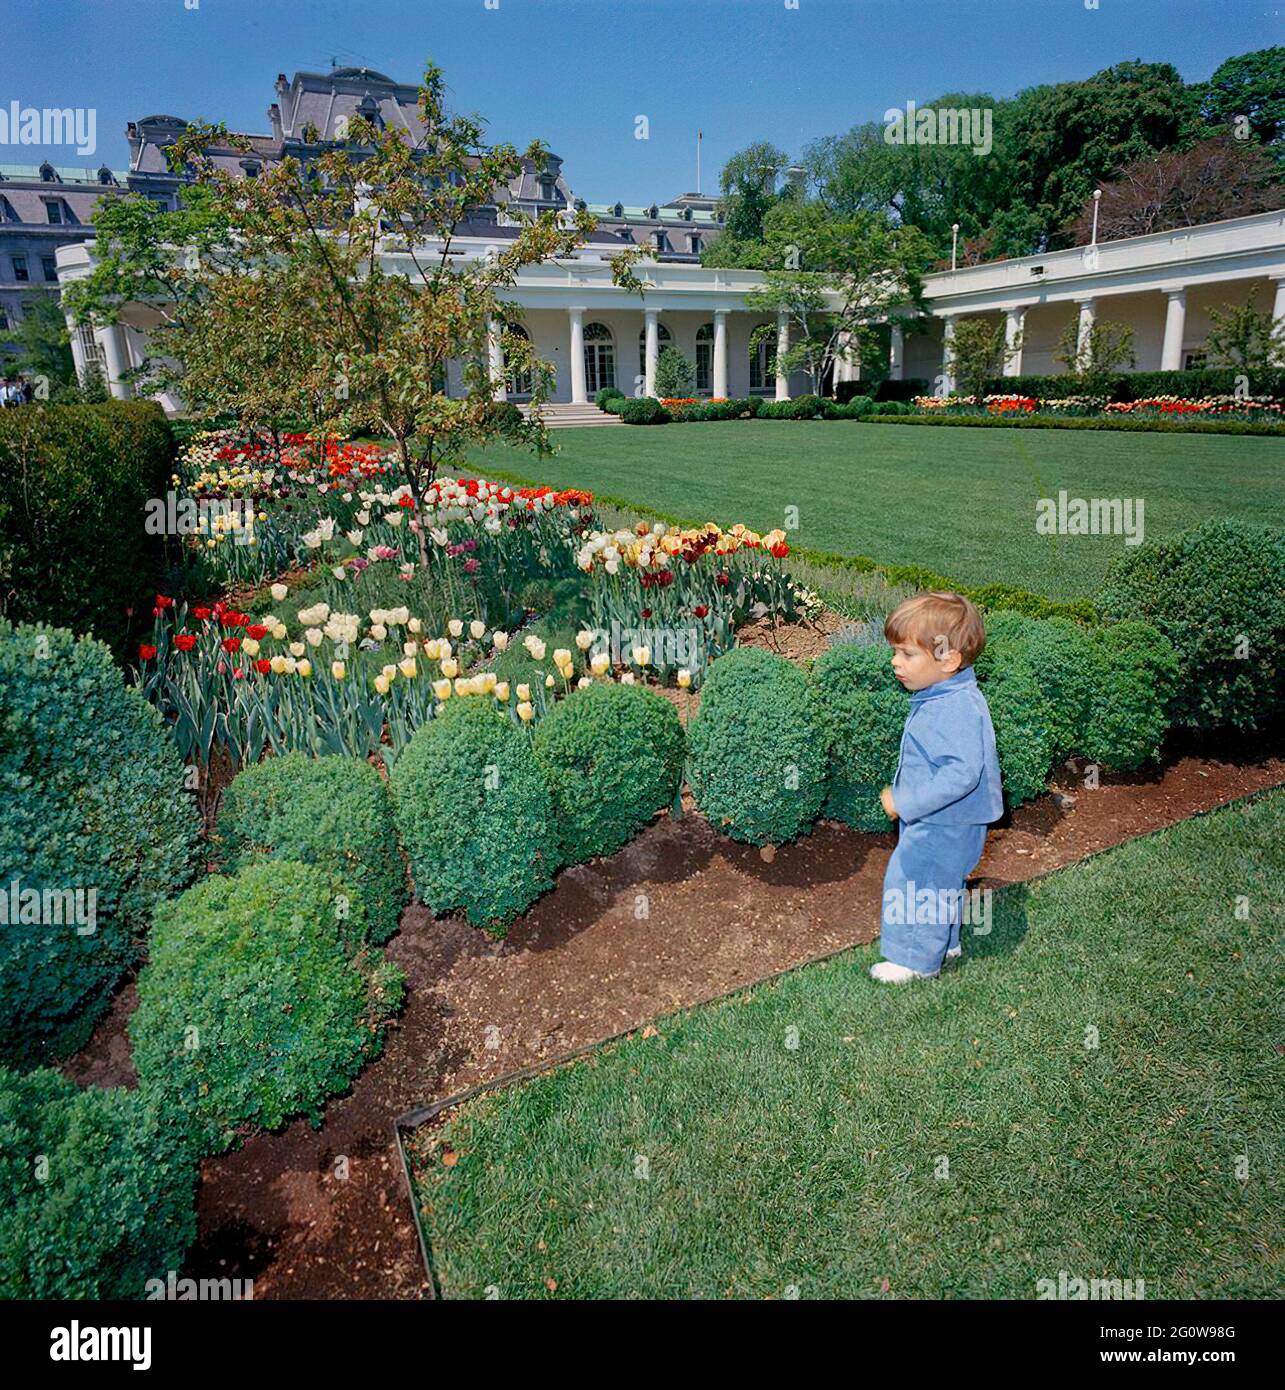 ST-C112-1-63                               26 April 1963  John F. Kennedy, (JFK, Jr.), in the Rose Garden  Please credit 'Cecil Stoughton. White House Photographs. John F. Kennedy Presidential Library and Museum, Boston' Stock Photo